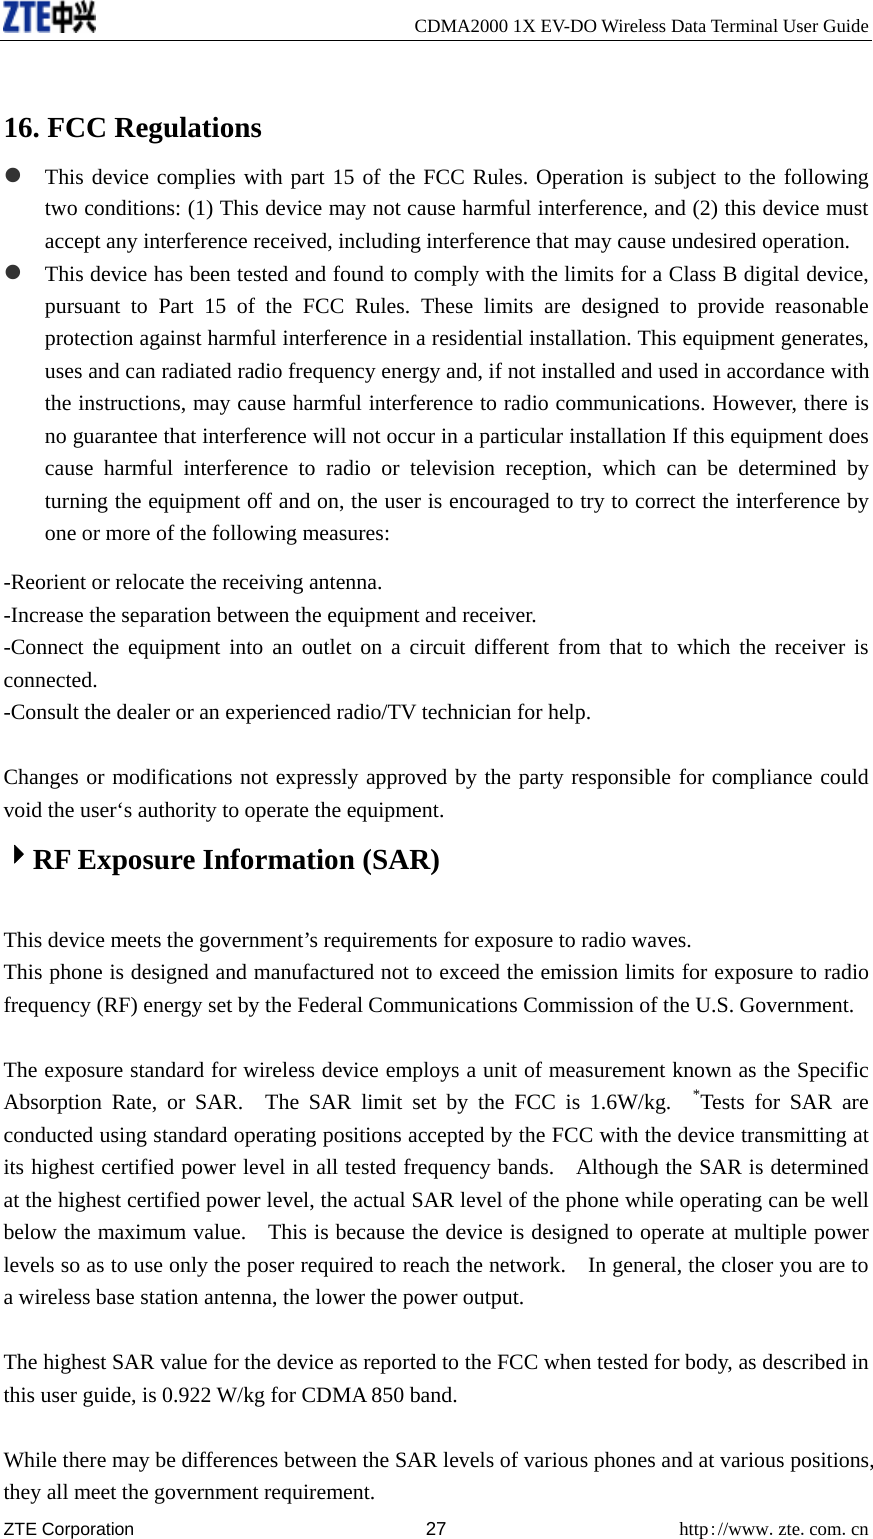     CDMA2000 1X EV-DO Wireless Data Terminal User Guide ZTE Corporation 27 http://www.zte.com.cn   16. FCC Regulations z This device complies with part 15 of the FCC Rules. Operation is subject to the following two conditions: (1) This device may not cause harmful interference, and (2) this device must accept any interference received, including interference that may cause undesired operation. z This device has been tested and found to comply with the limits for a Class B digital device, pursuant to Part 15 of the FCC Rules. These limits are designed to provide reasonable protection against harmful interference in a residential installation. This equipment generates, uses and can radiated radio frequency energy and, if not installed and used in accordance with the instructions, may cause harmful interference to radio communications. However, there is no guarantee that interference will not occur in a particular installation If this equipment does cause harmful interference to radio or television reception, which can be determined by turning the equipment off and on, the user is encouraged to try to correct the interference by one or more of the following measures: -Reorient or relocate the receiving antenna. -Increase the separation between the equipment and receiver. -Connect the equipment into an outlet on a circuit different from that to which the receiver is connected. -Consult the dealer or an experienced radio/TV technician for help.  Changes or modifications not expressly approved by the party responsible for compliance could void the user‘s authority to operate the equipment. 4RF Exposure Information (SAR)    This device meets the government’s requirements for exposure to radio waves. This phone is designed and manufactured not to exceed the emission limits for exposure to radio frequency (RF) energy set by the Federal Communications Commission of the U.S. Government.      The exposure standard for wireless device employs a unit of measurement known as the Specific Absorption Rate, or SAR.  The SAR limit set by the FCC is 1.6W/kg.  *Tests for SAR are conducted using standard operating positions accepted by the FCC with the device transmitting at its highest certified power level in all tested frequency bands.    Although the SAR is determined at the highest certified power level, the actual SAR level of the phone while operating can be well below the maximum value.    This is because the device is designed to operate at multiple power levels so as to use only the poser required to reach the network.    In general, the closer you are to a wireless base station antenna, the lower the power output.  The highest SAR value for the device as reported to the FCC when tested for body, as described in this user guide, is 0.922 W/kg for CDMA 850 band.  While there may be differences between the SAR levels of various phones and at various positions, they all meet the government requirement. 